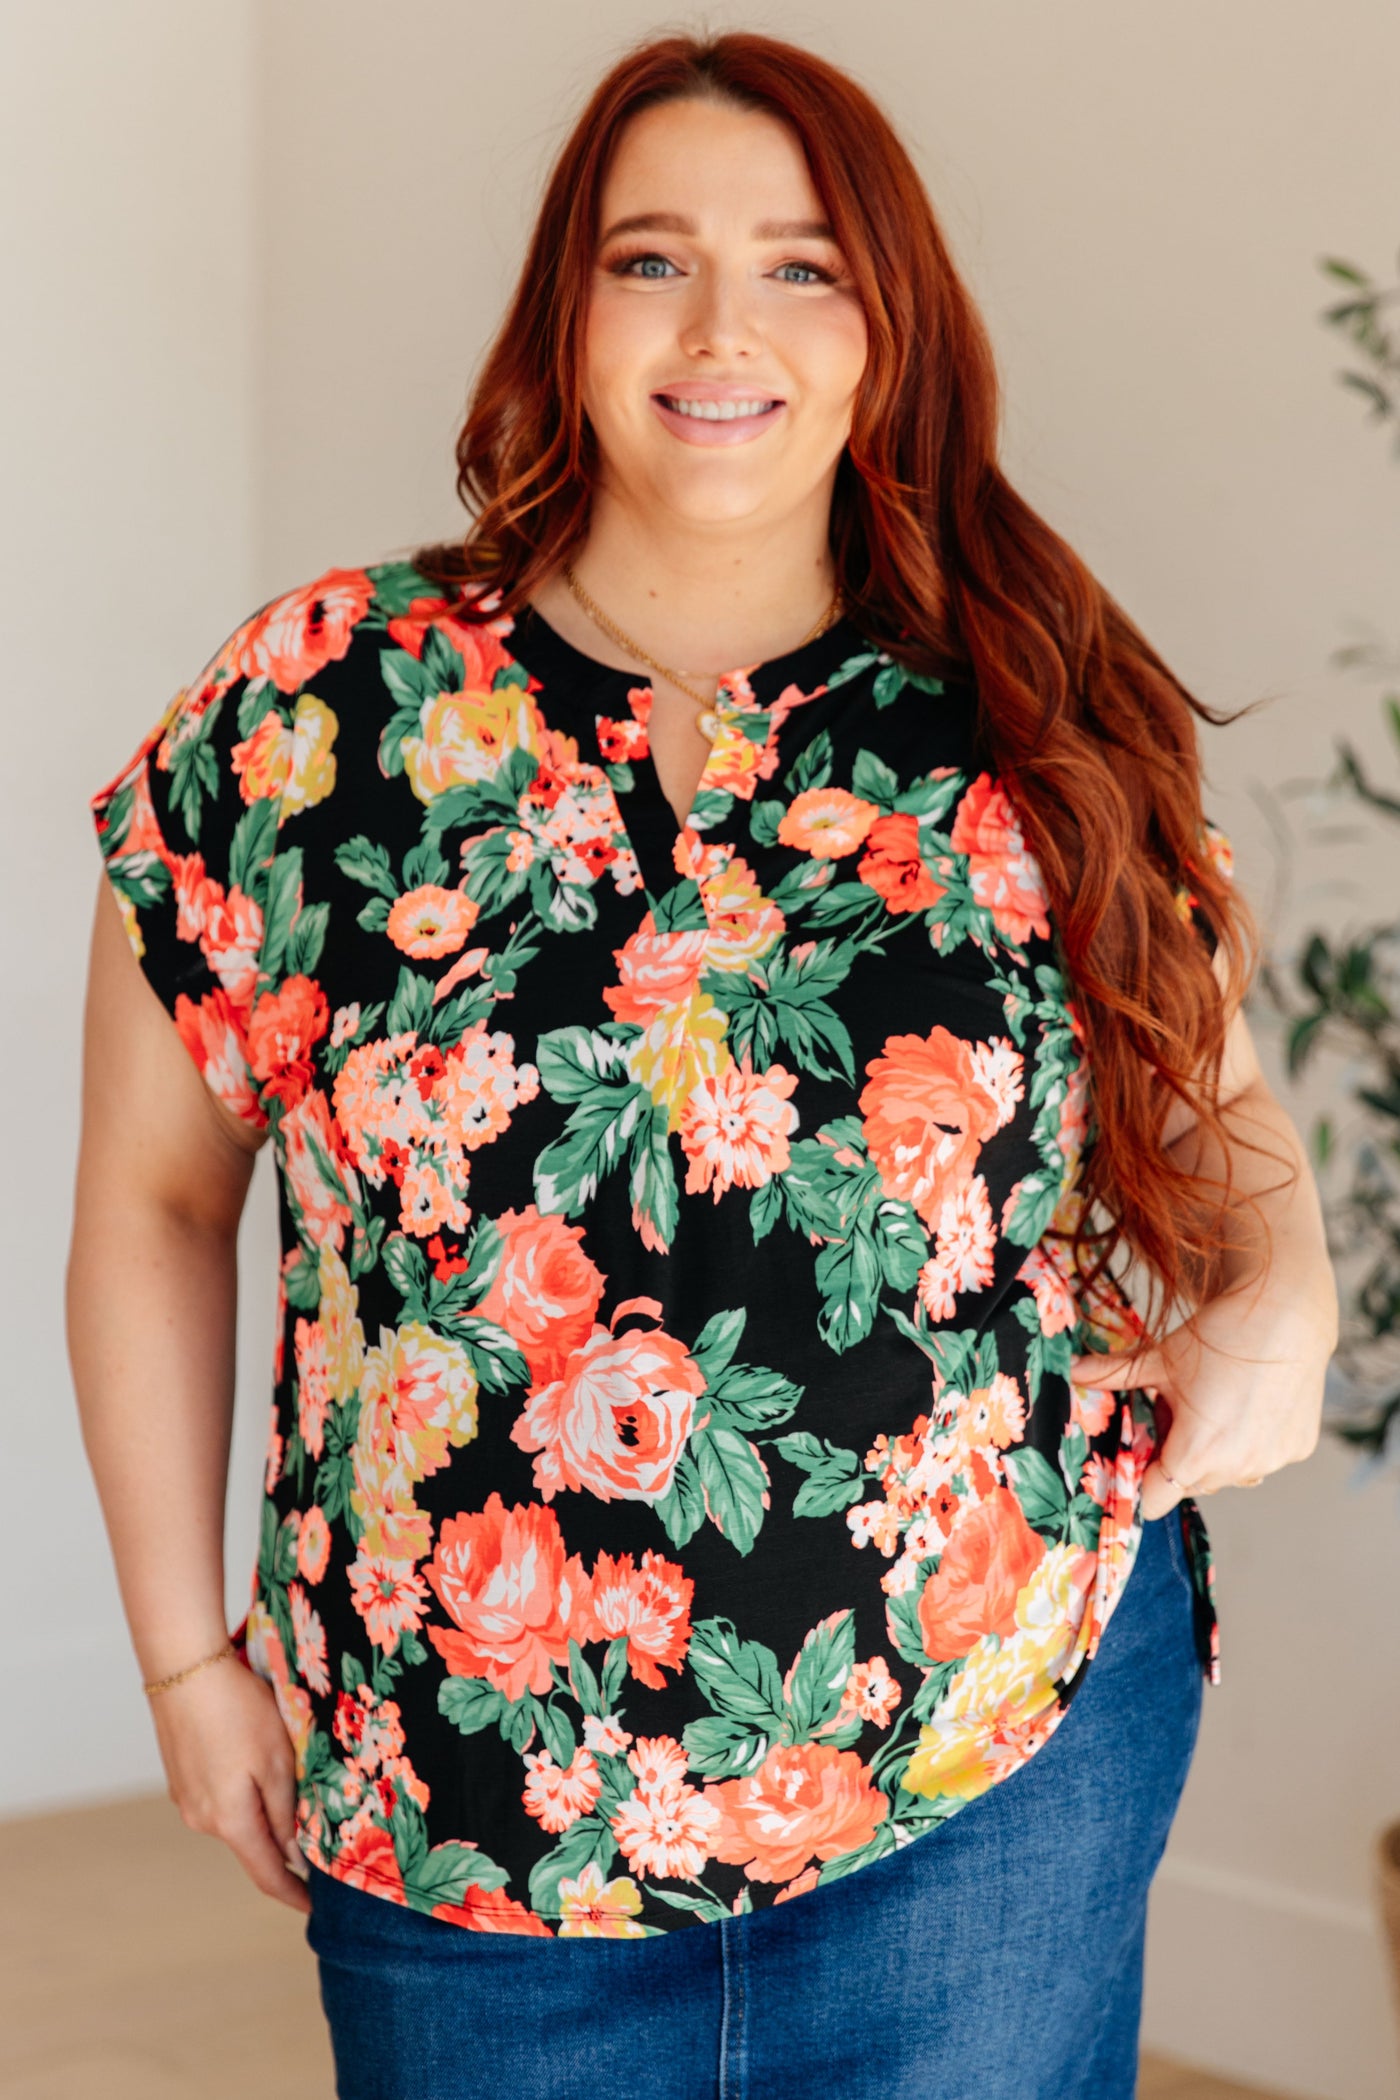 Lizzy Cap Sleeve Top in Black Garden Floral-Womens-Ave Shops-Market Street Nest, Fashionable Clothing, Shoes and Home Décor Located in Mabank, TX